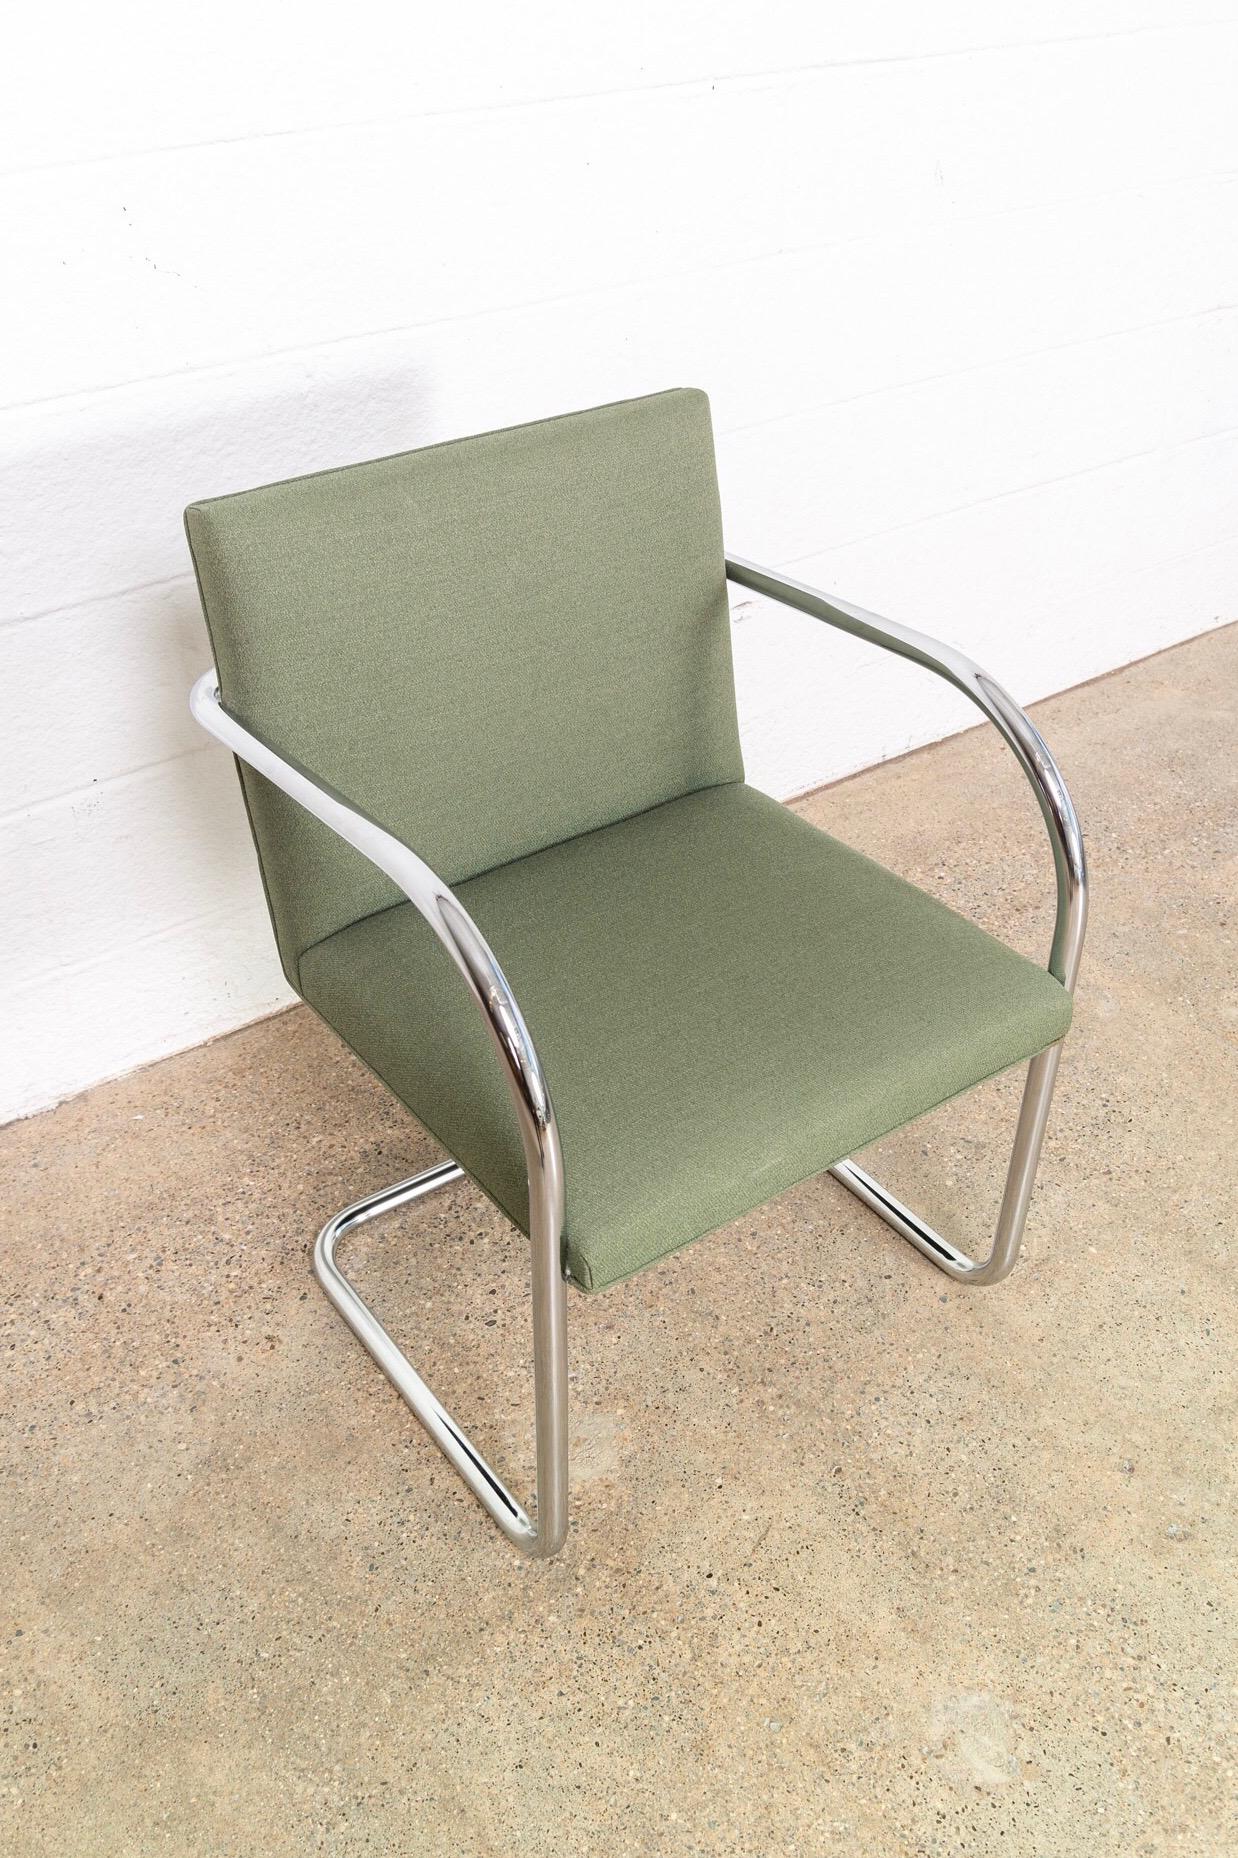 Mies van der Rohe Green Brno Chrome Cantilever Dining Chairs, Set of 4 For Sale 2